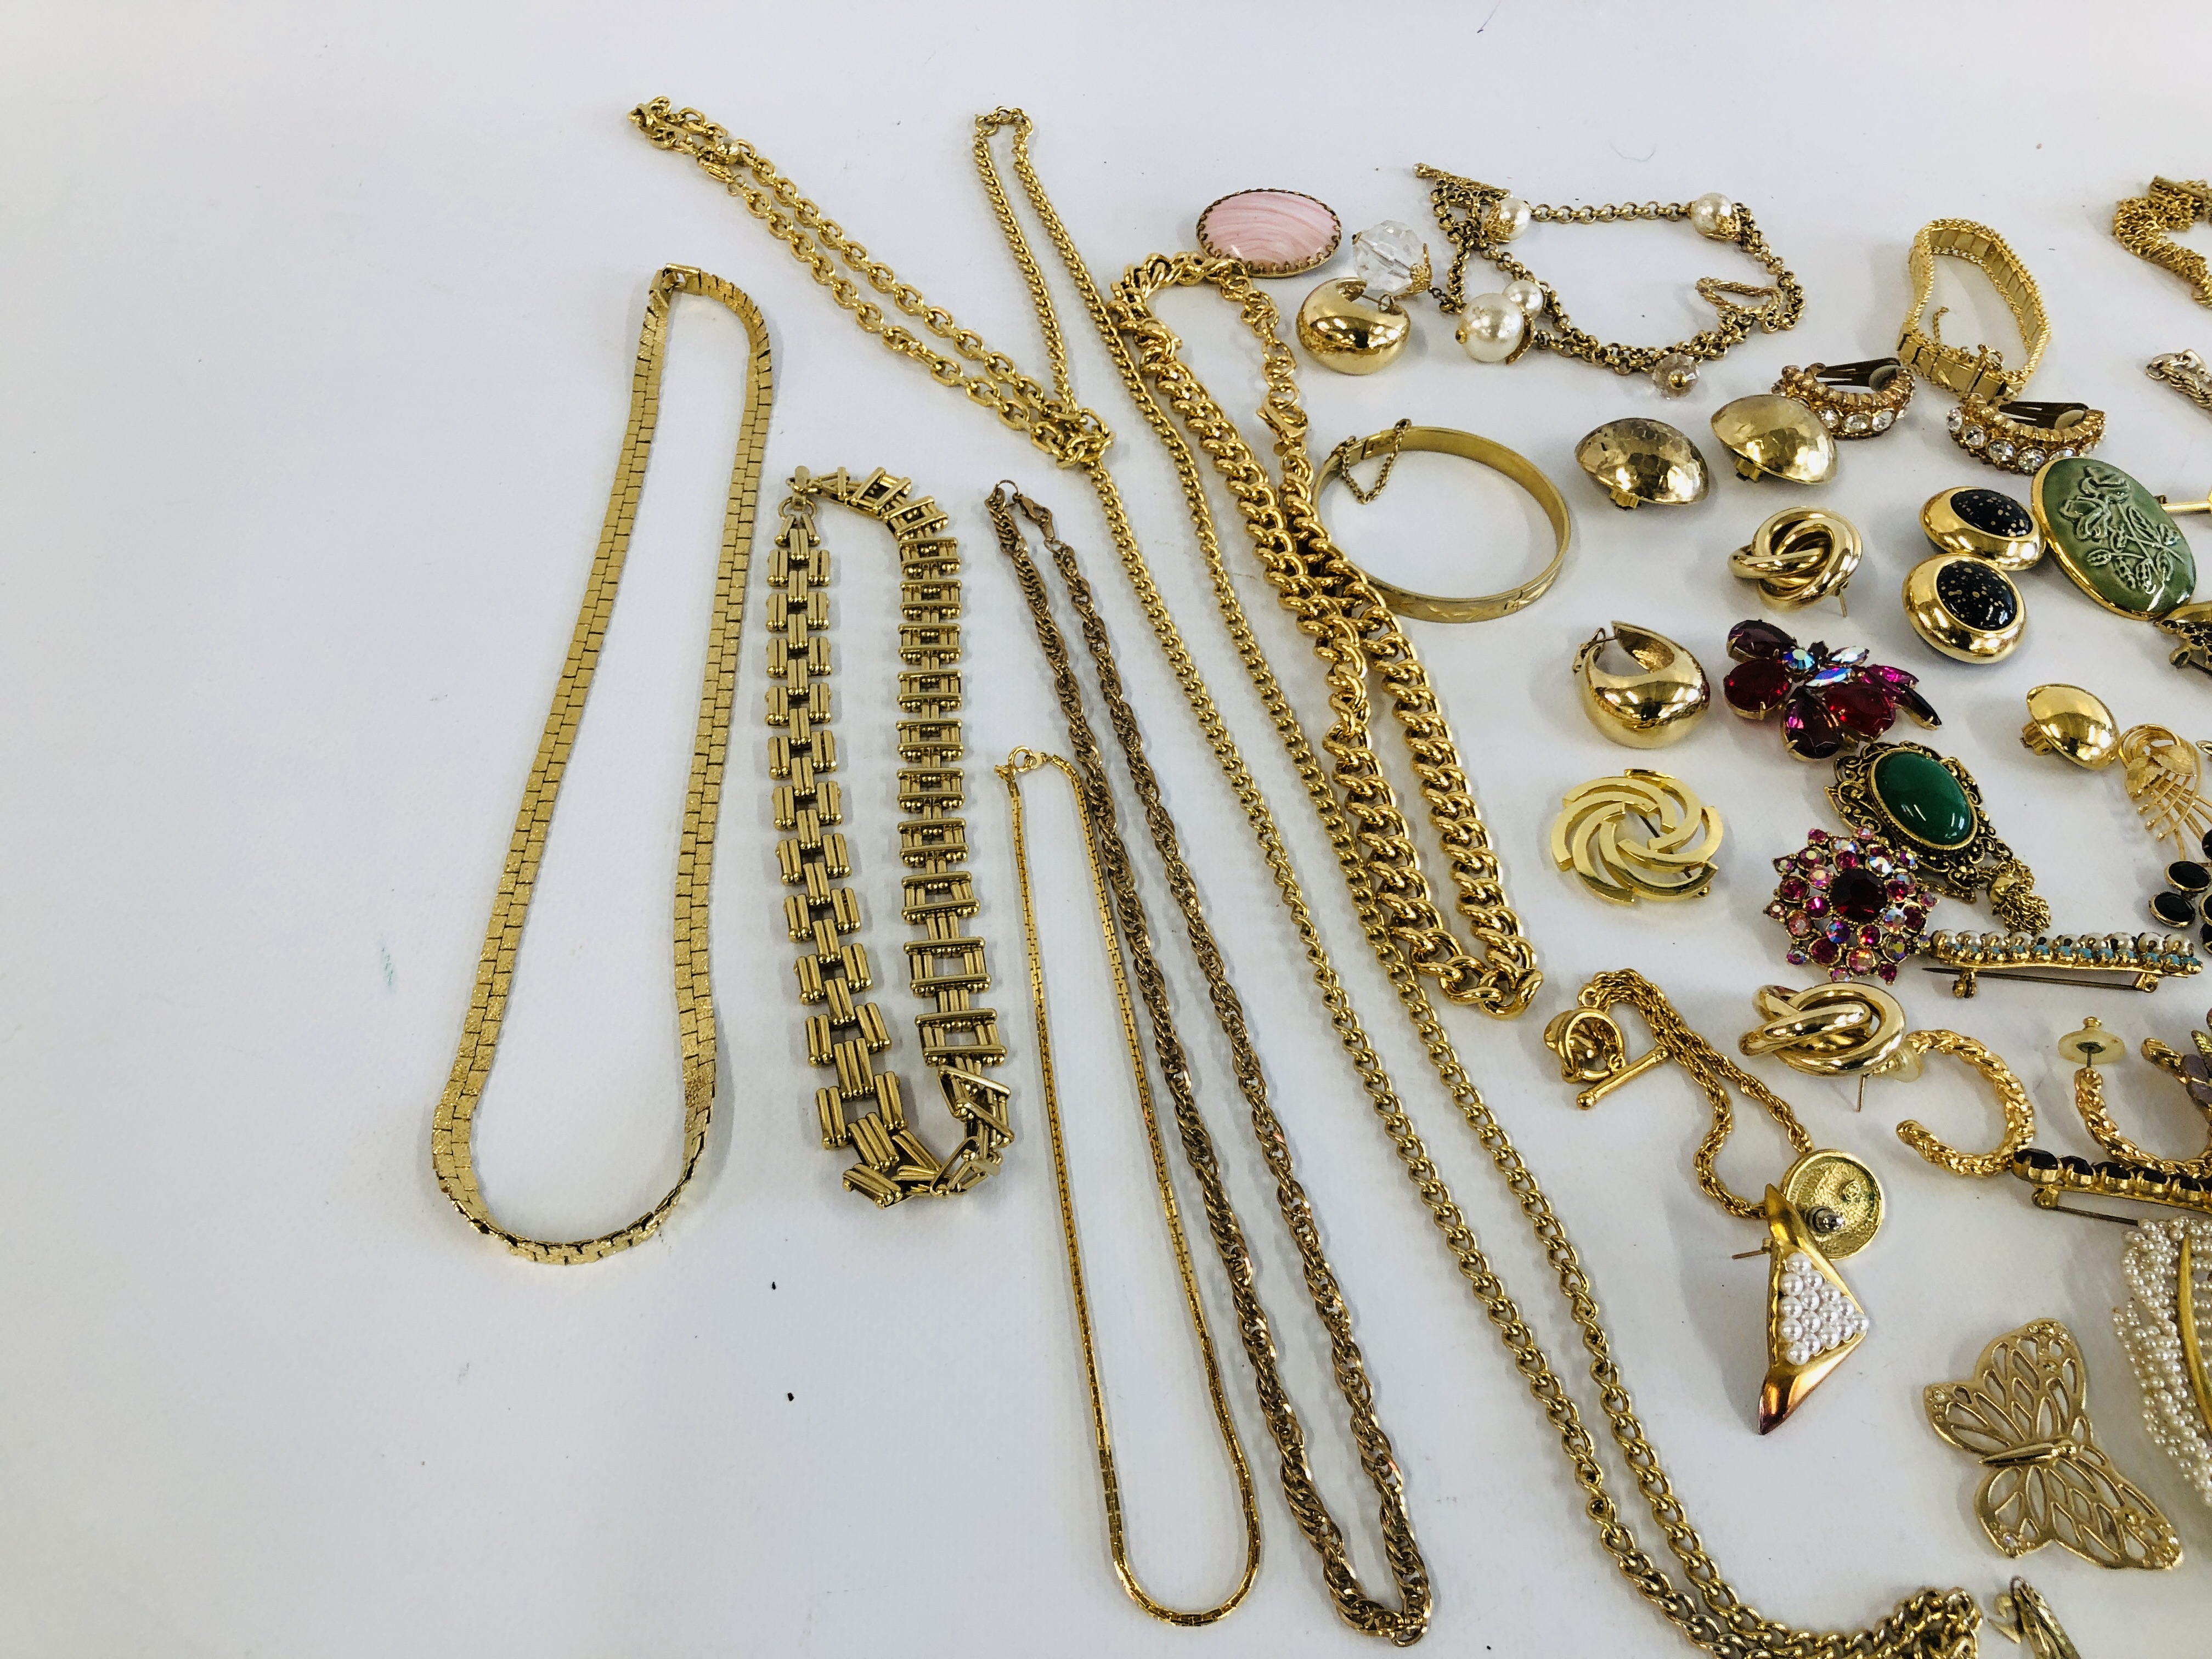 VINTAGE / RETRO AND MODERN GOLD TONE METAL NECKLACES, BRACELETS AND BROOCHES. - Image 6 of 6